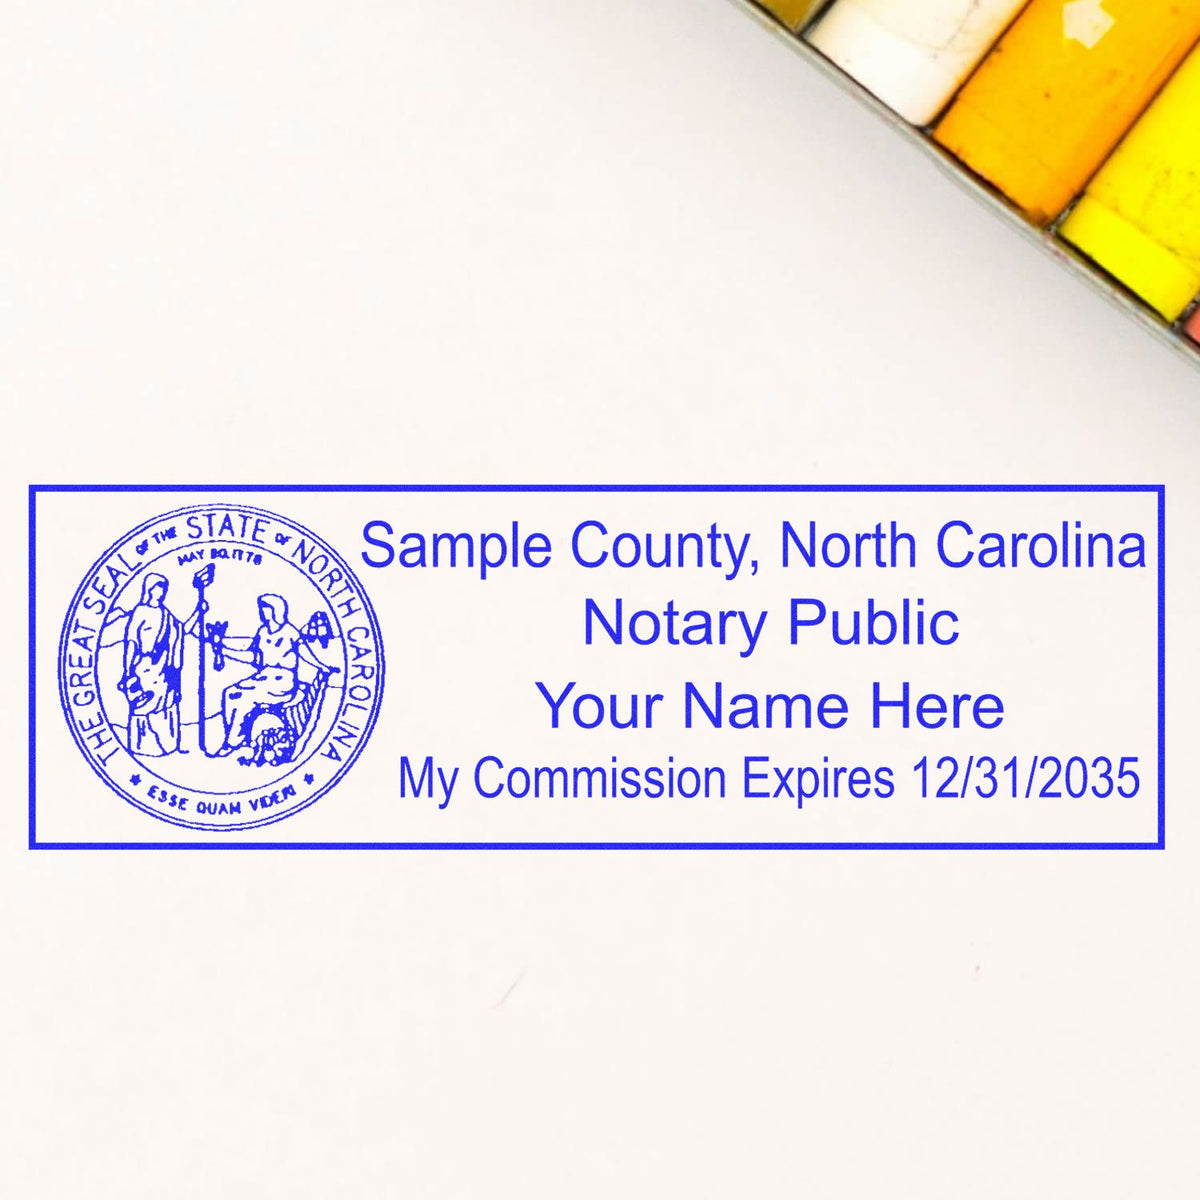 The PSI North Carolina Notary Stamp stamp impression comes to life with a crisp, detailed photo on paper - showcasing true professional quality.